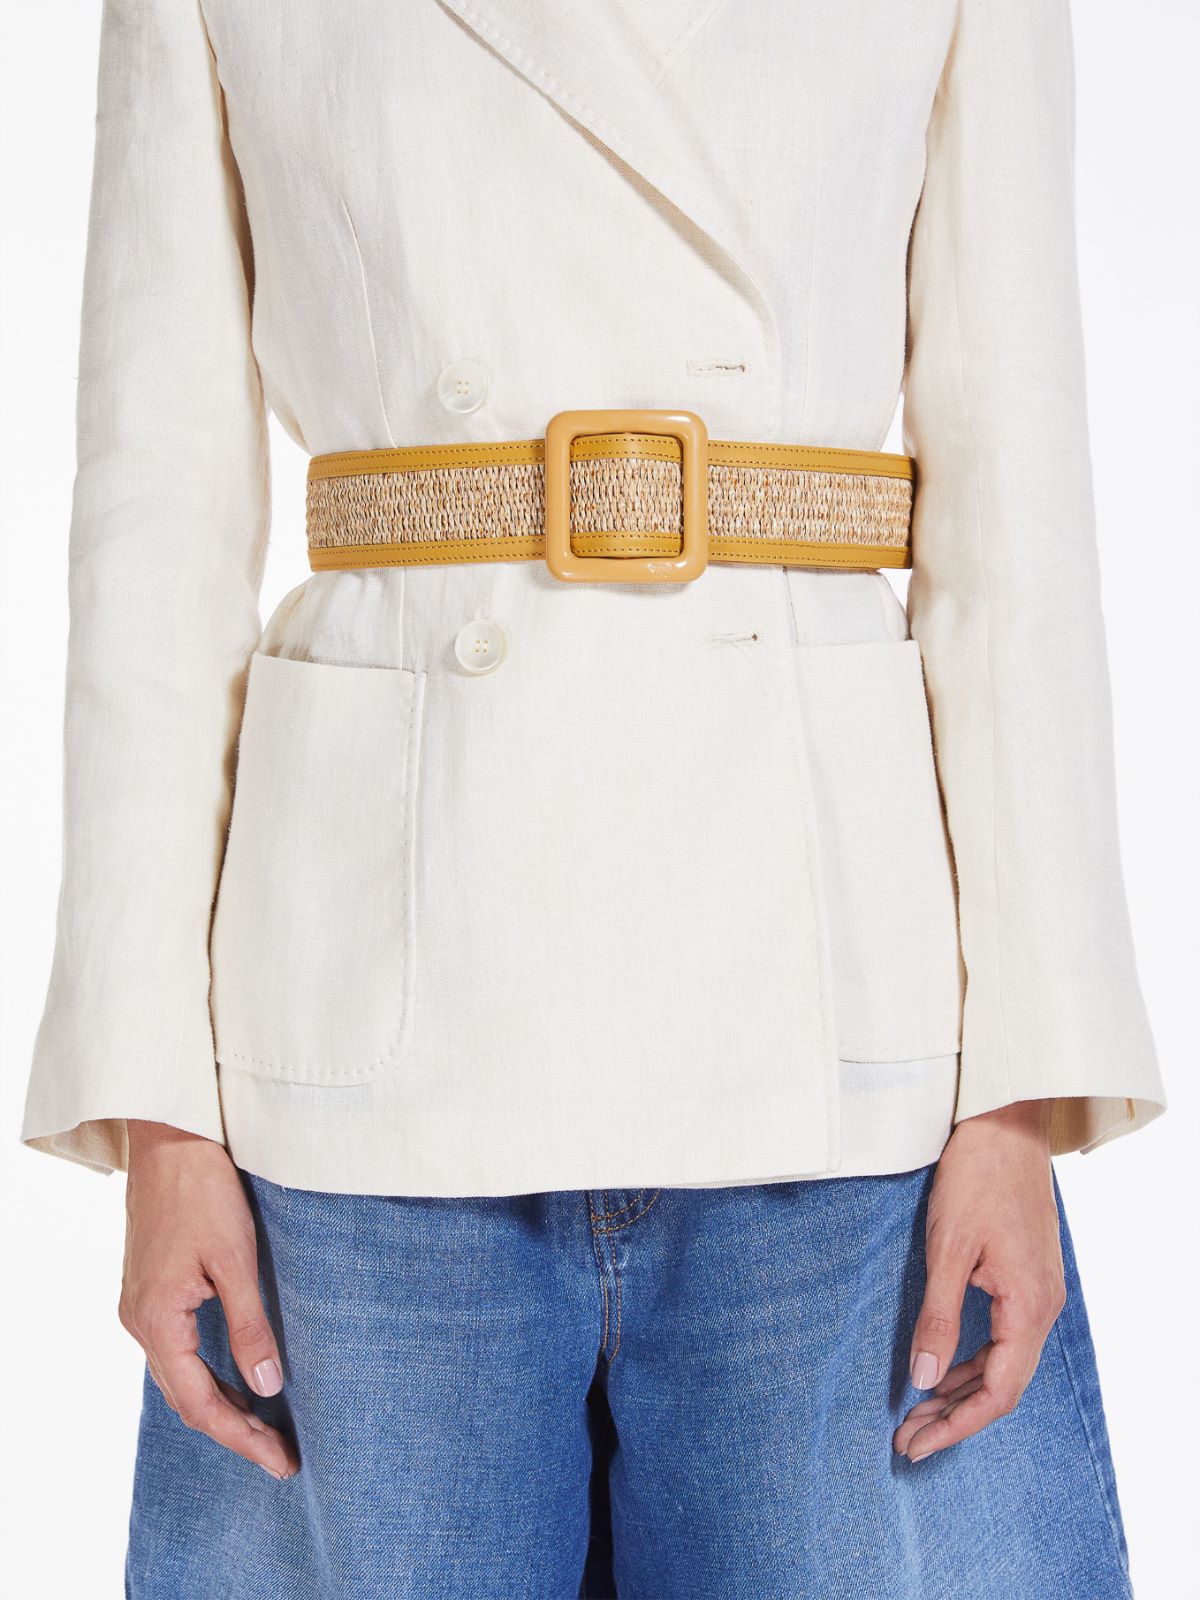 Cotton and leather belt - NATURAL - Weekend Max Mara - 5